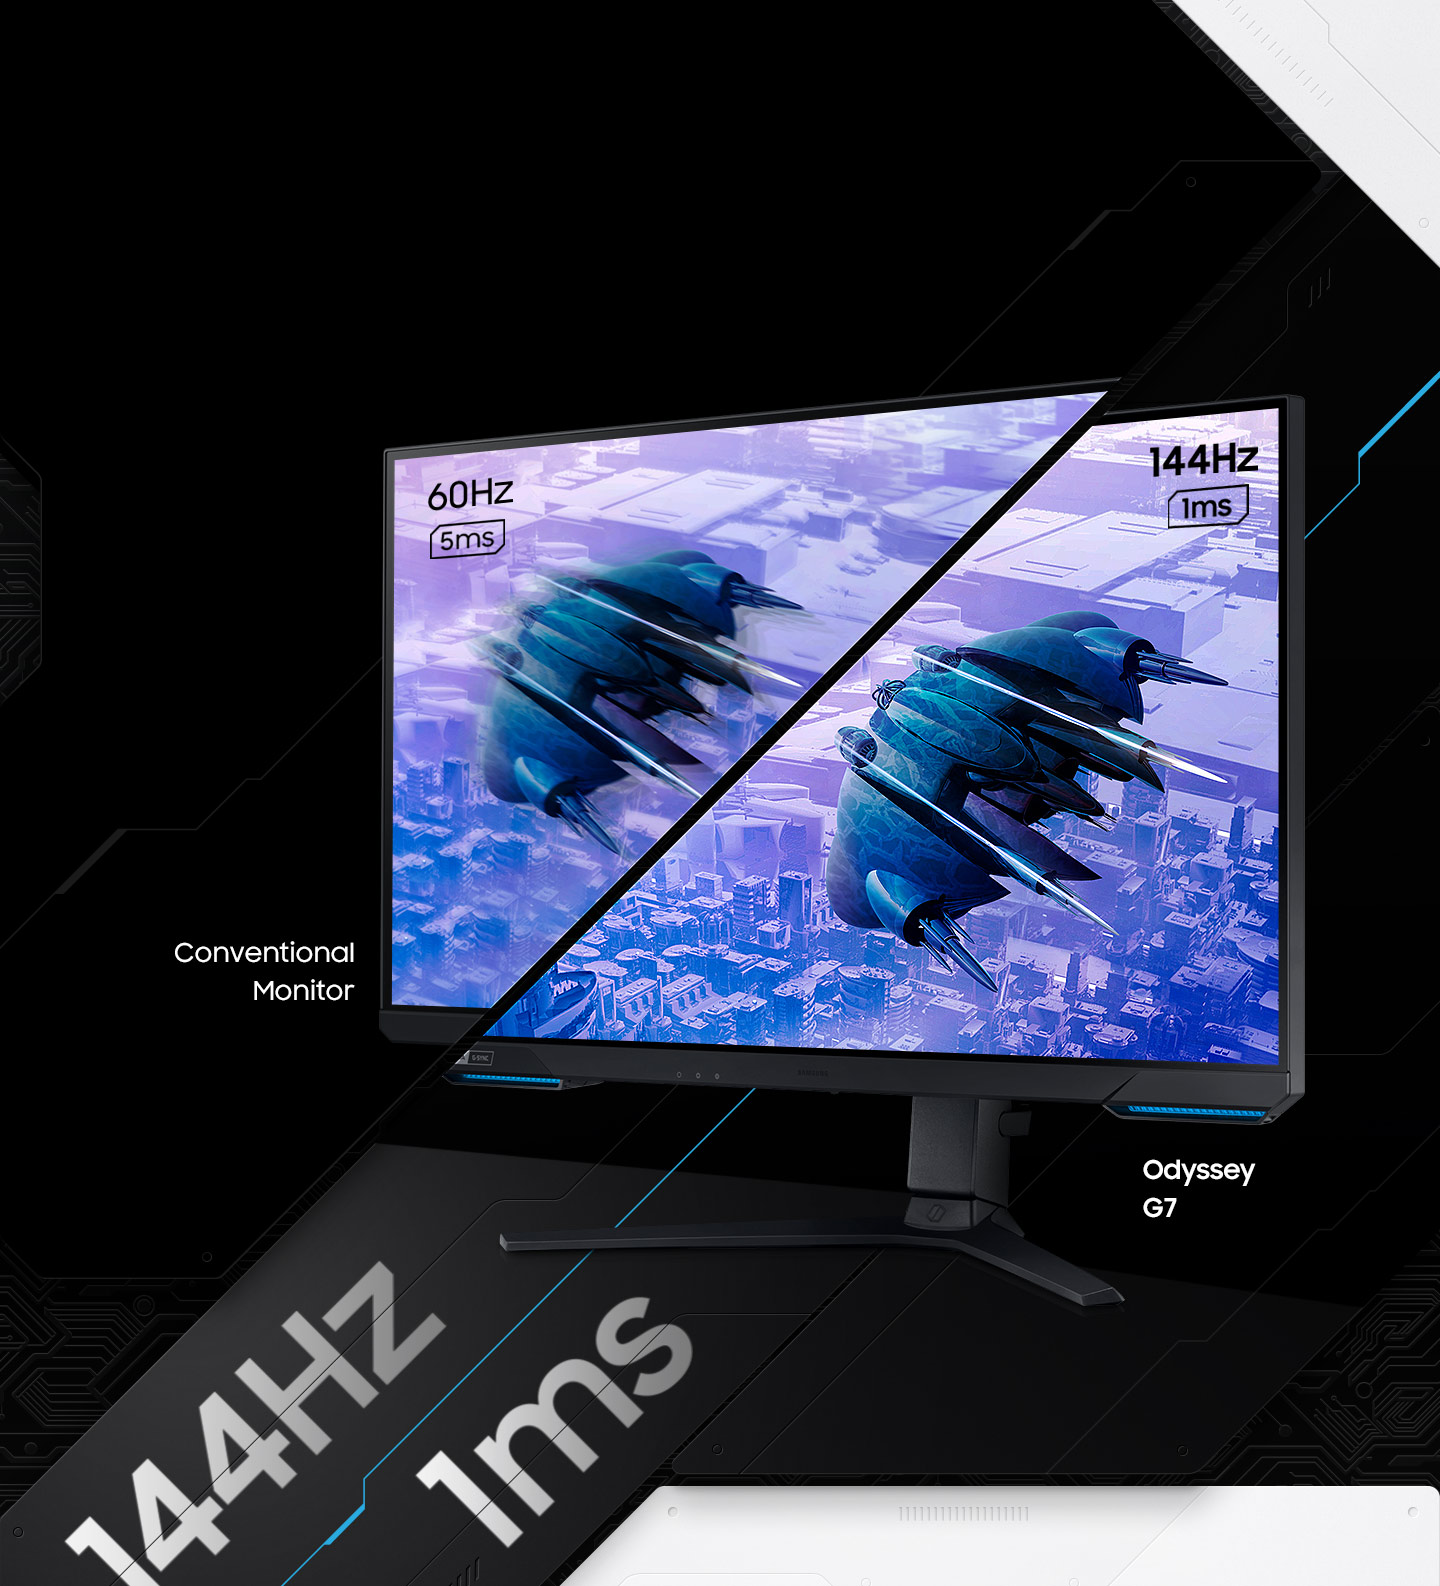 Express 144Hz Refresh Rate & Lightning Fast 1ms Response Times